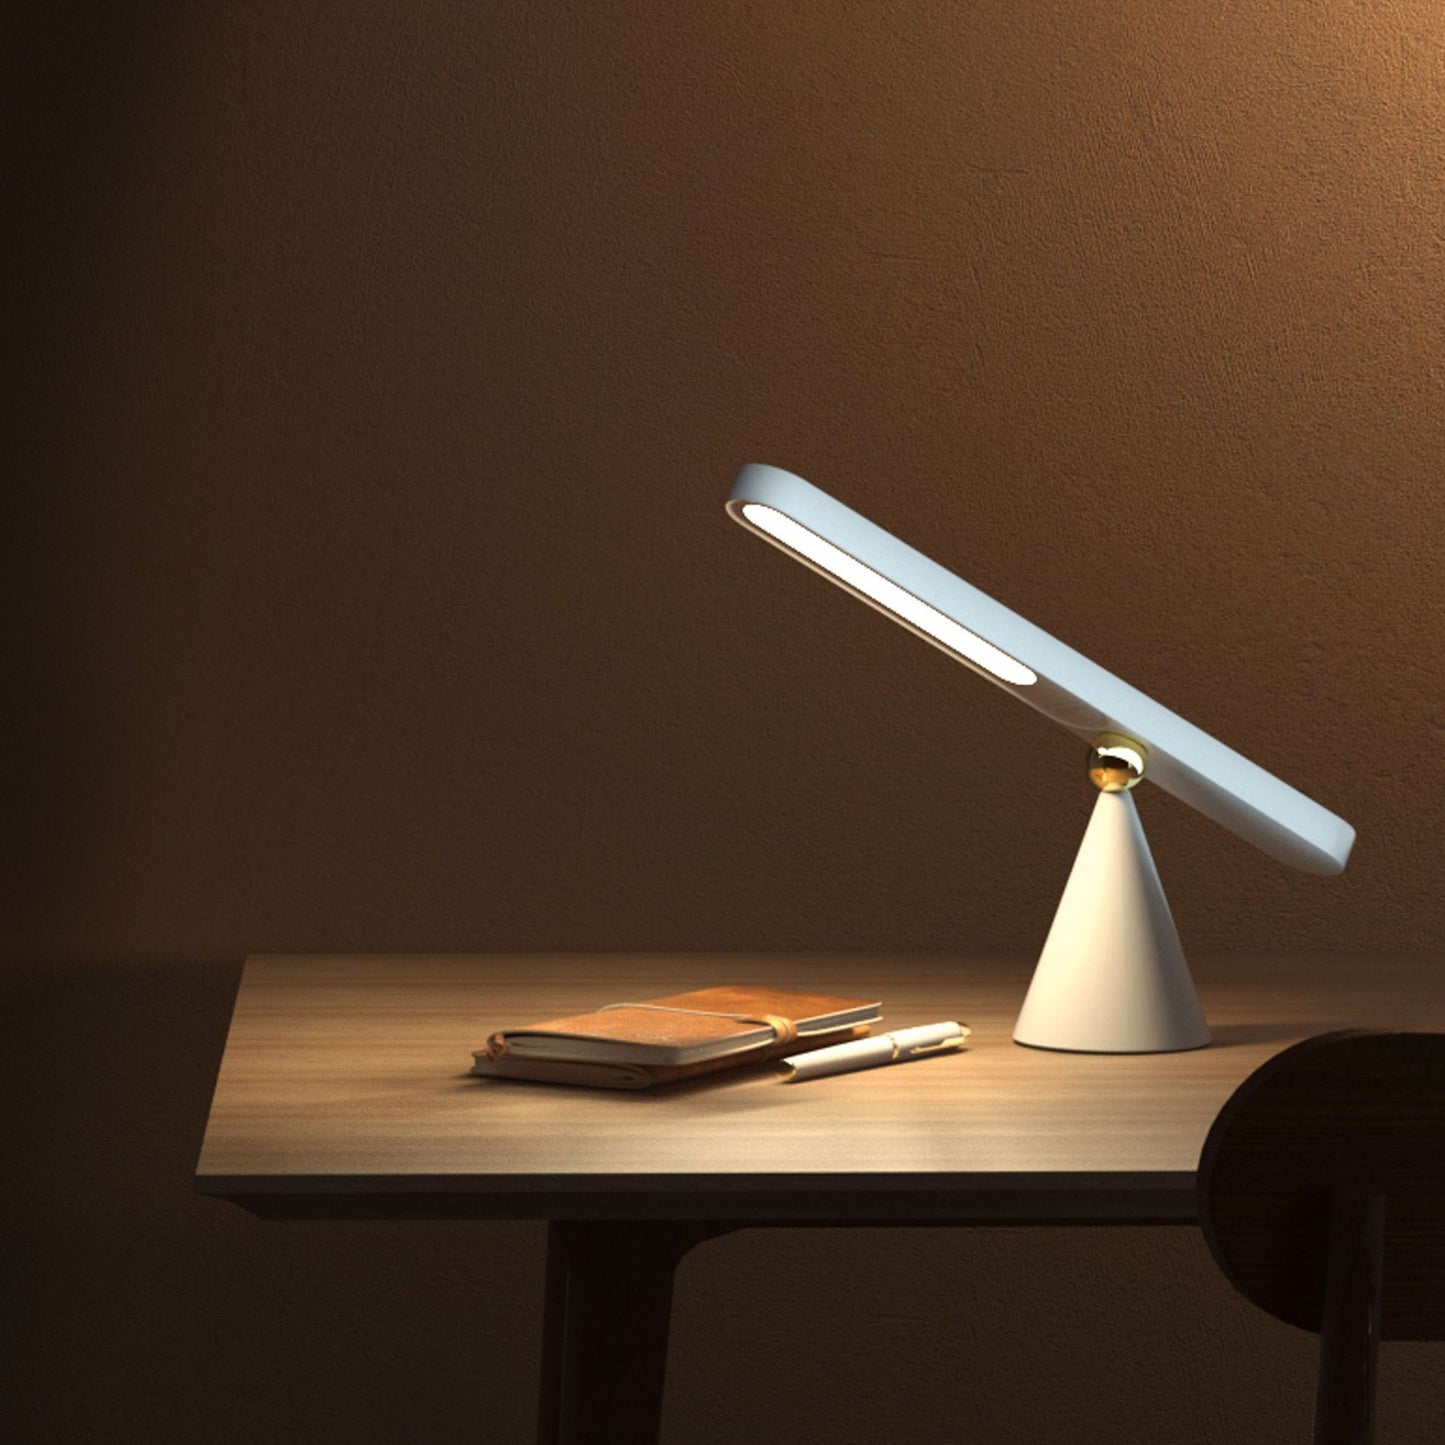 Wireless Multifunctional Magnetic Suction Small Night Light Reading Table Lamp Creative Geometric Desk Lamp